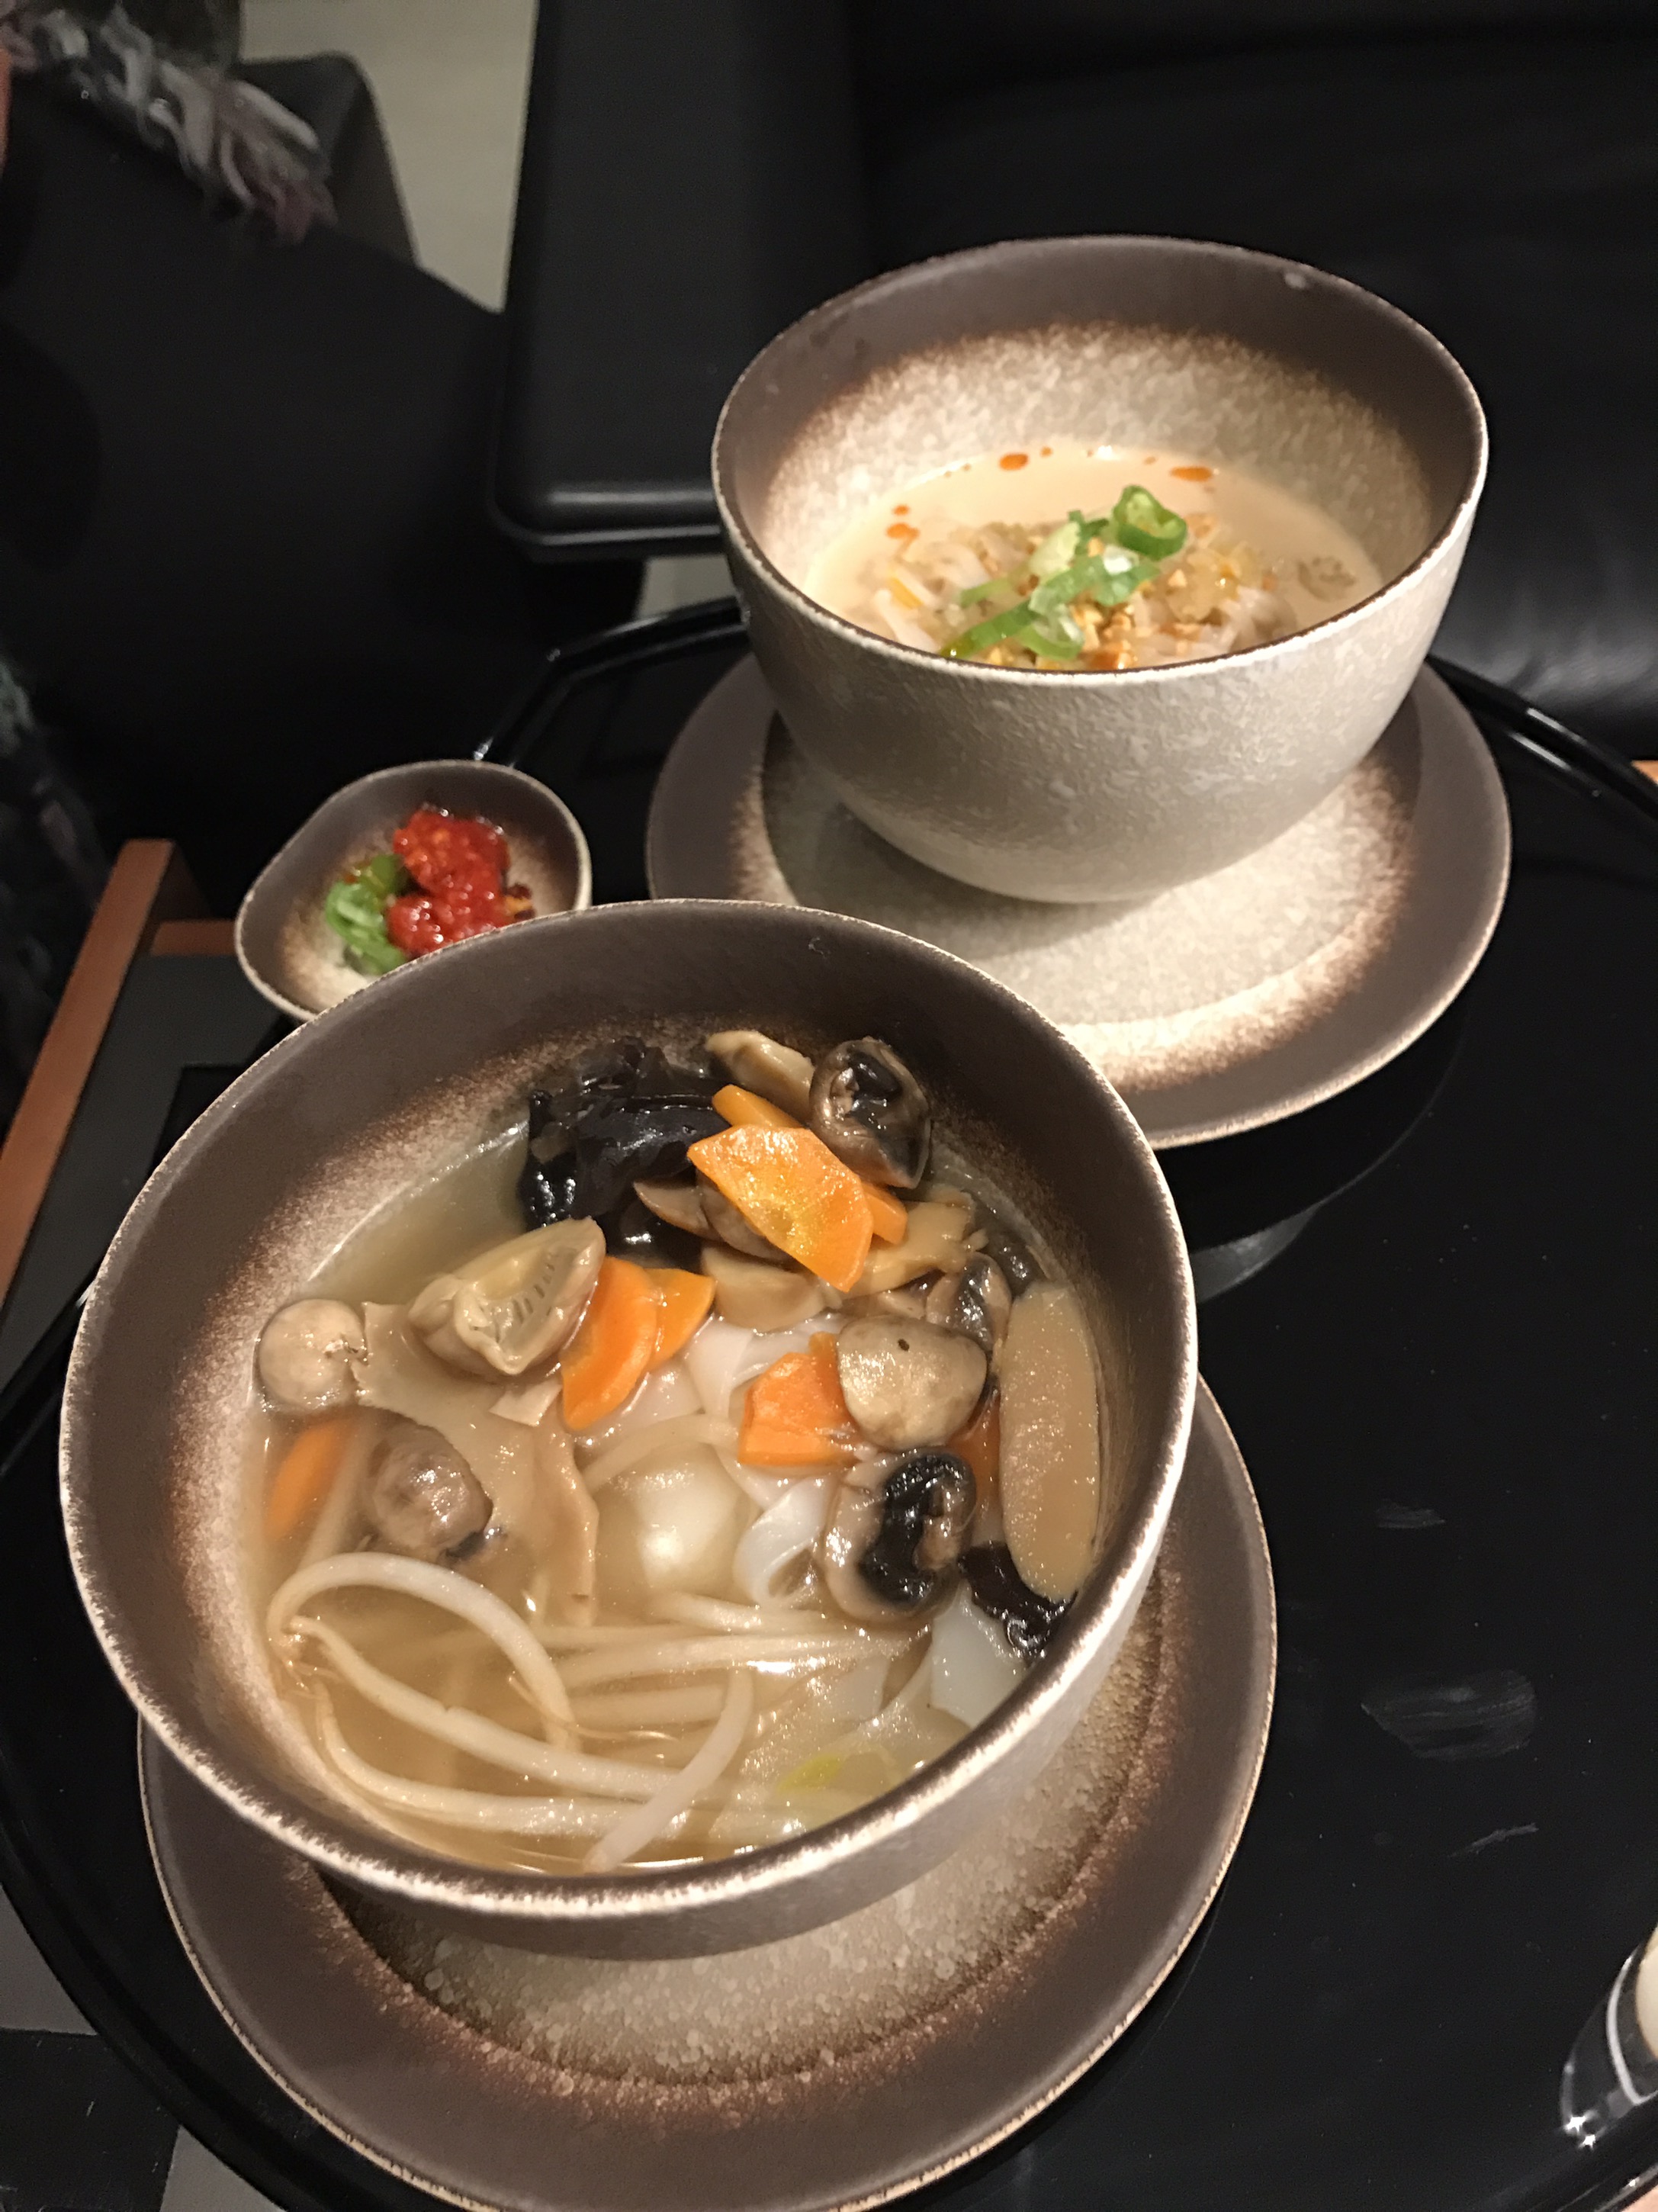 bowls of soup and noodles on plates